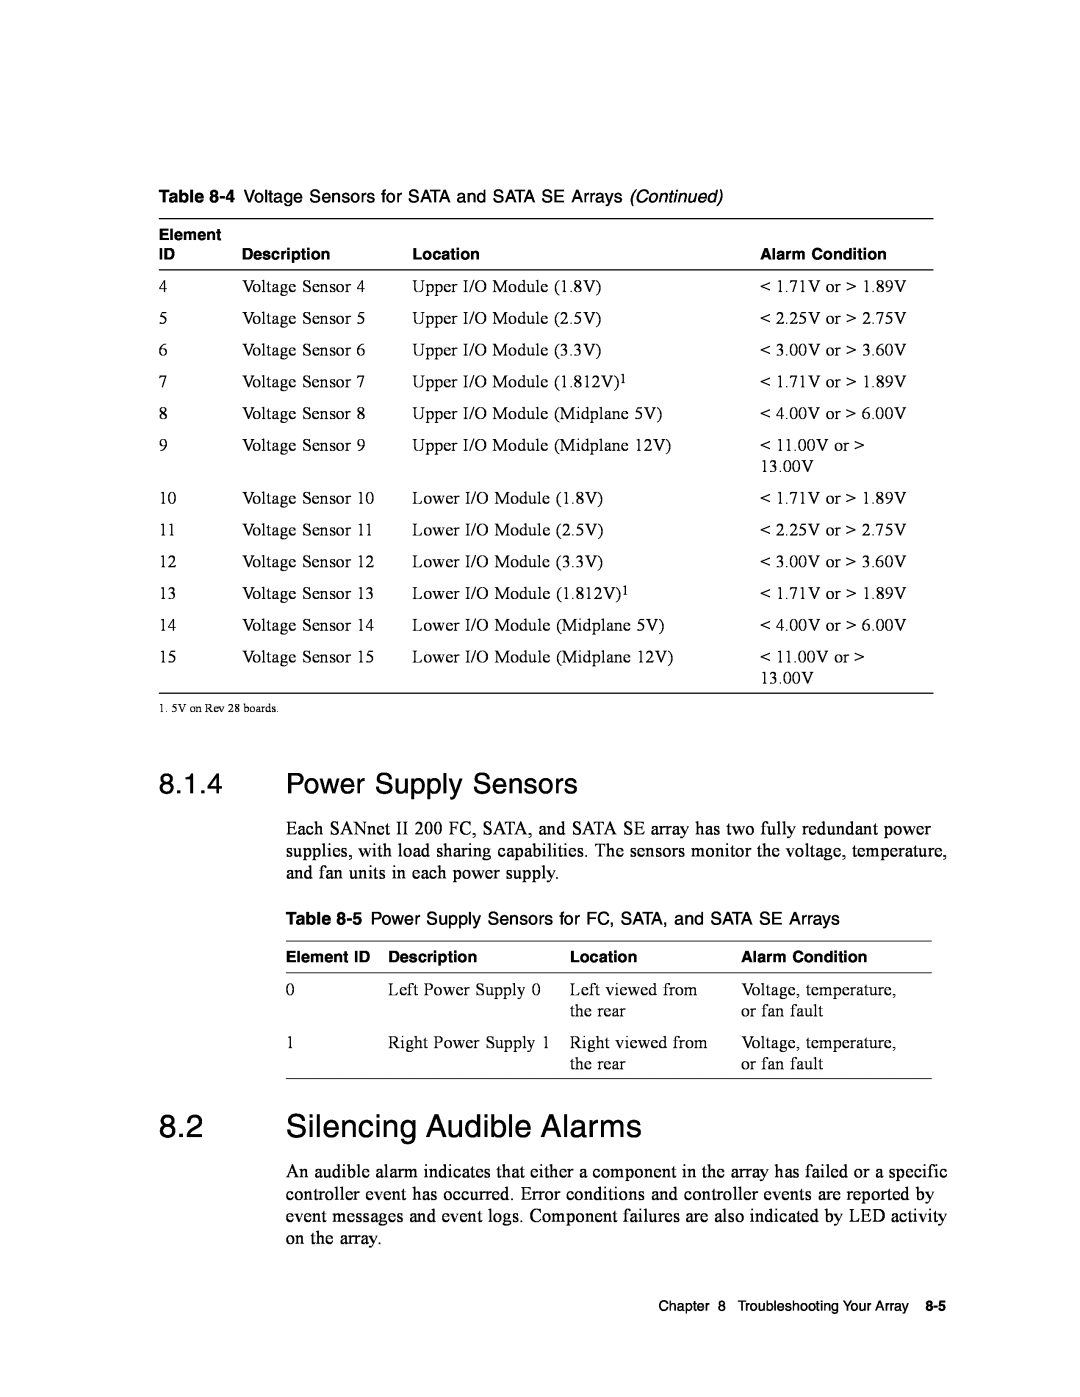 Dot Hill Systems II 200 FC service manual Silencing Audible Alarms, Power Supply Sensors 